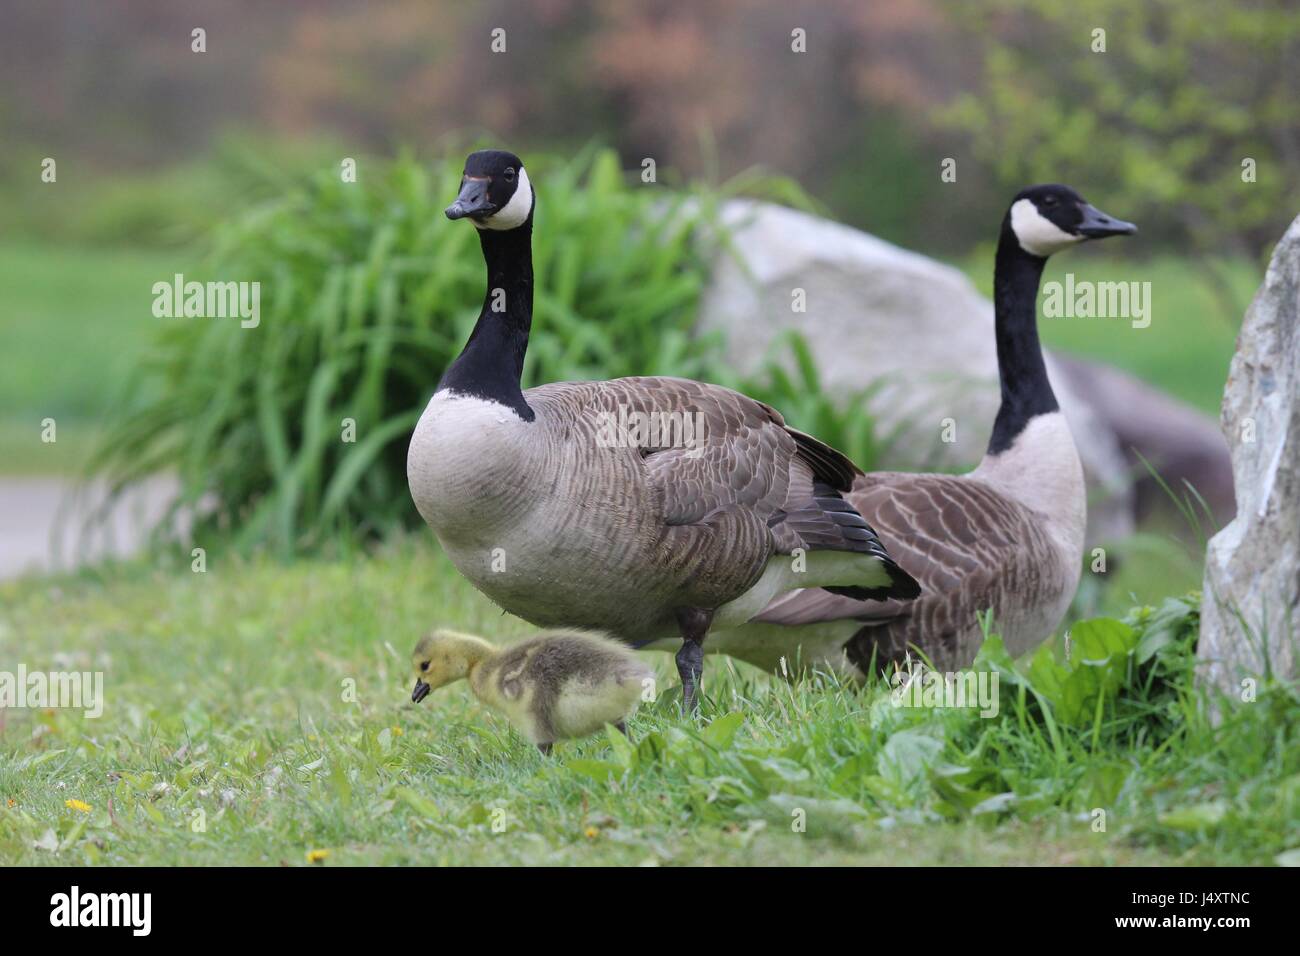 A Canada Goose Branta canadensis family, with one gosling, standing near a pond. Stock Photo